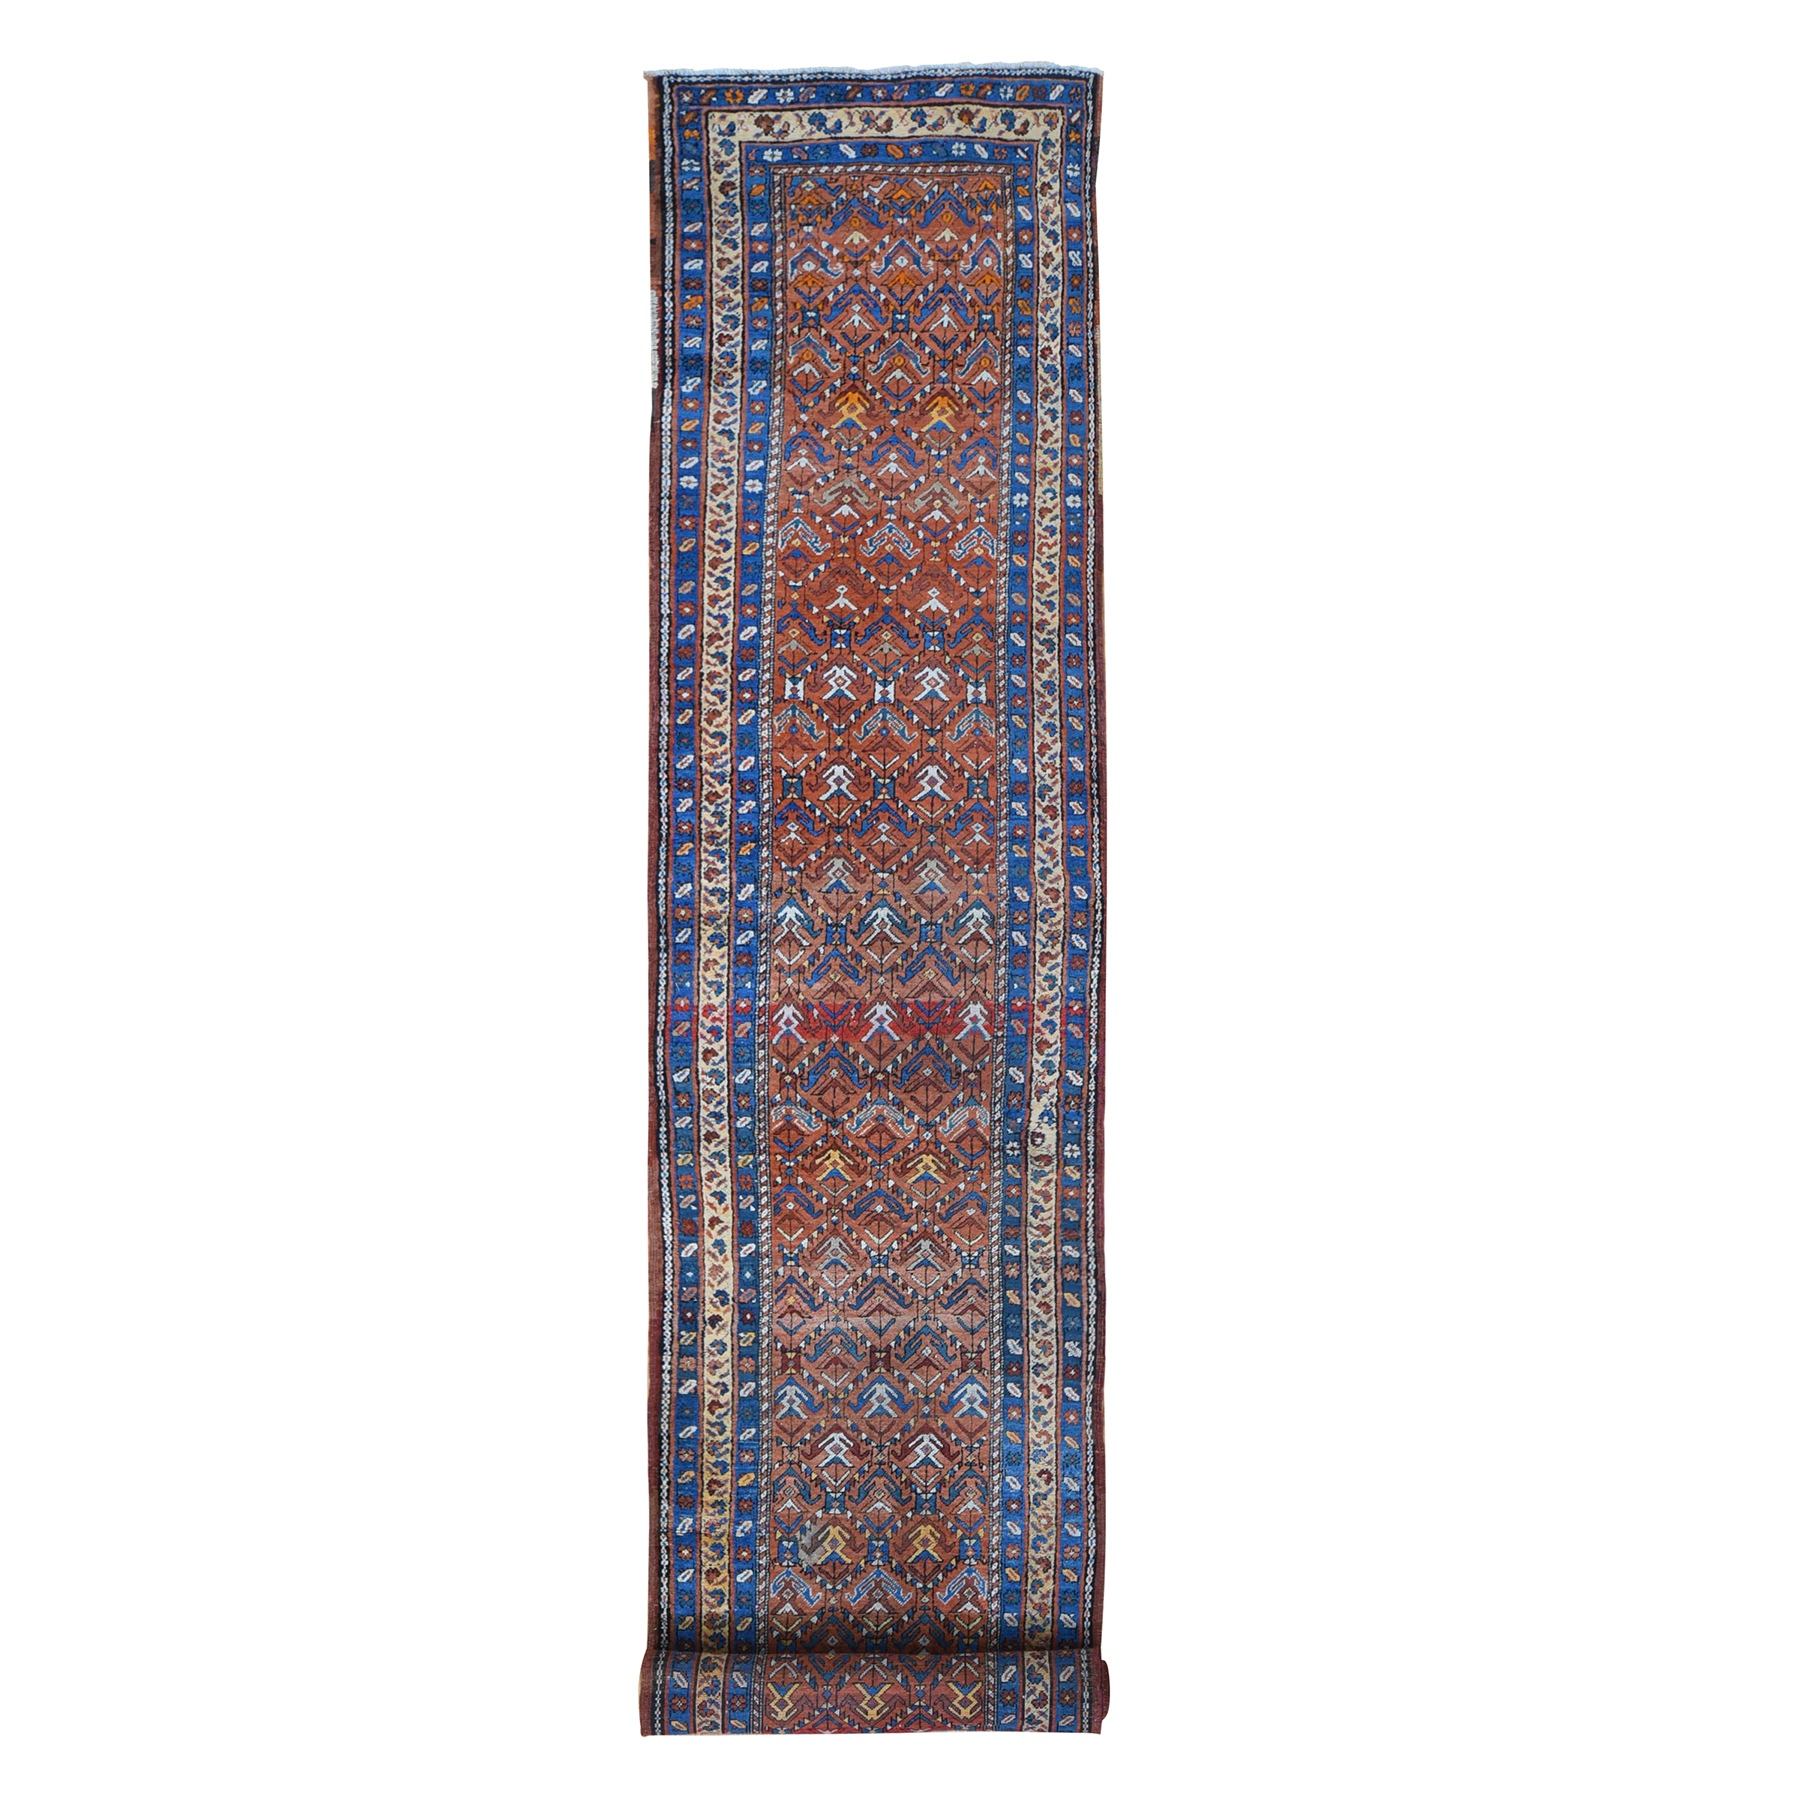 Antique Collection Hand Knotted Red Rug No: 1133148